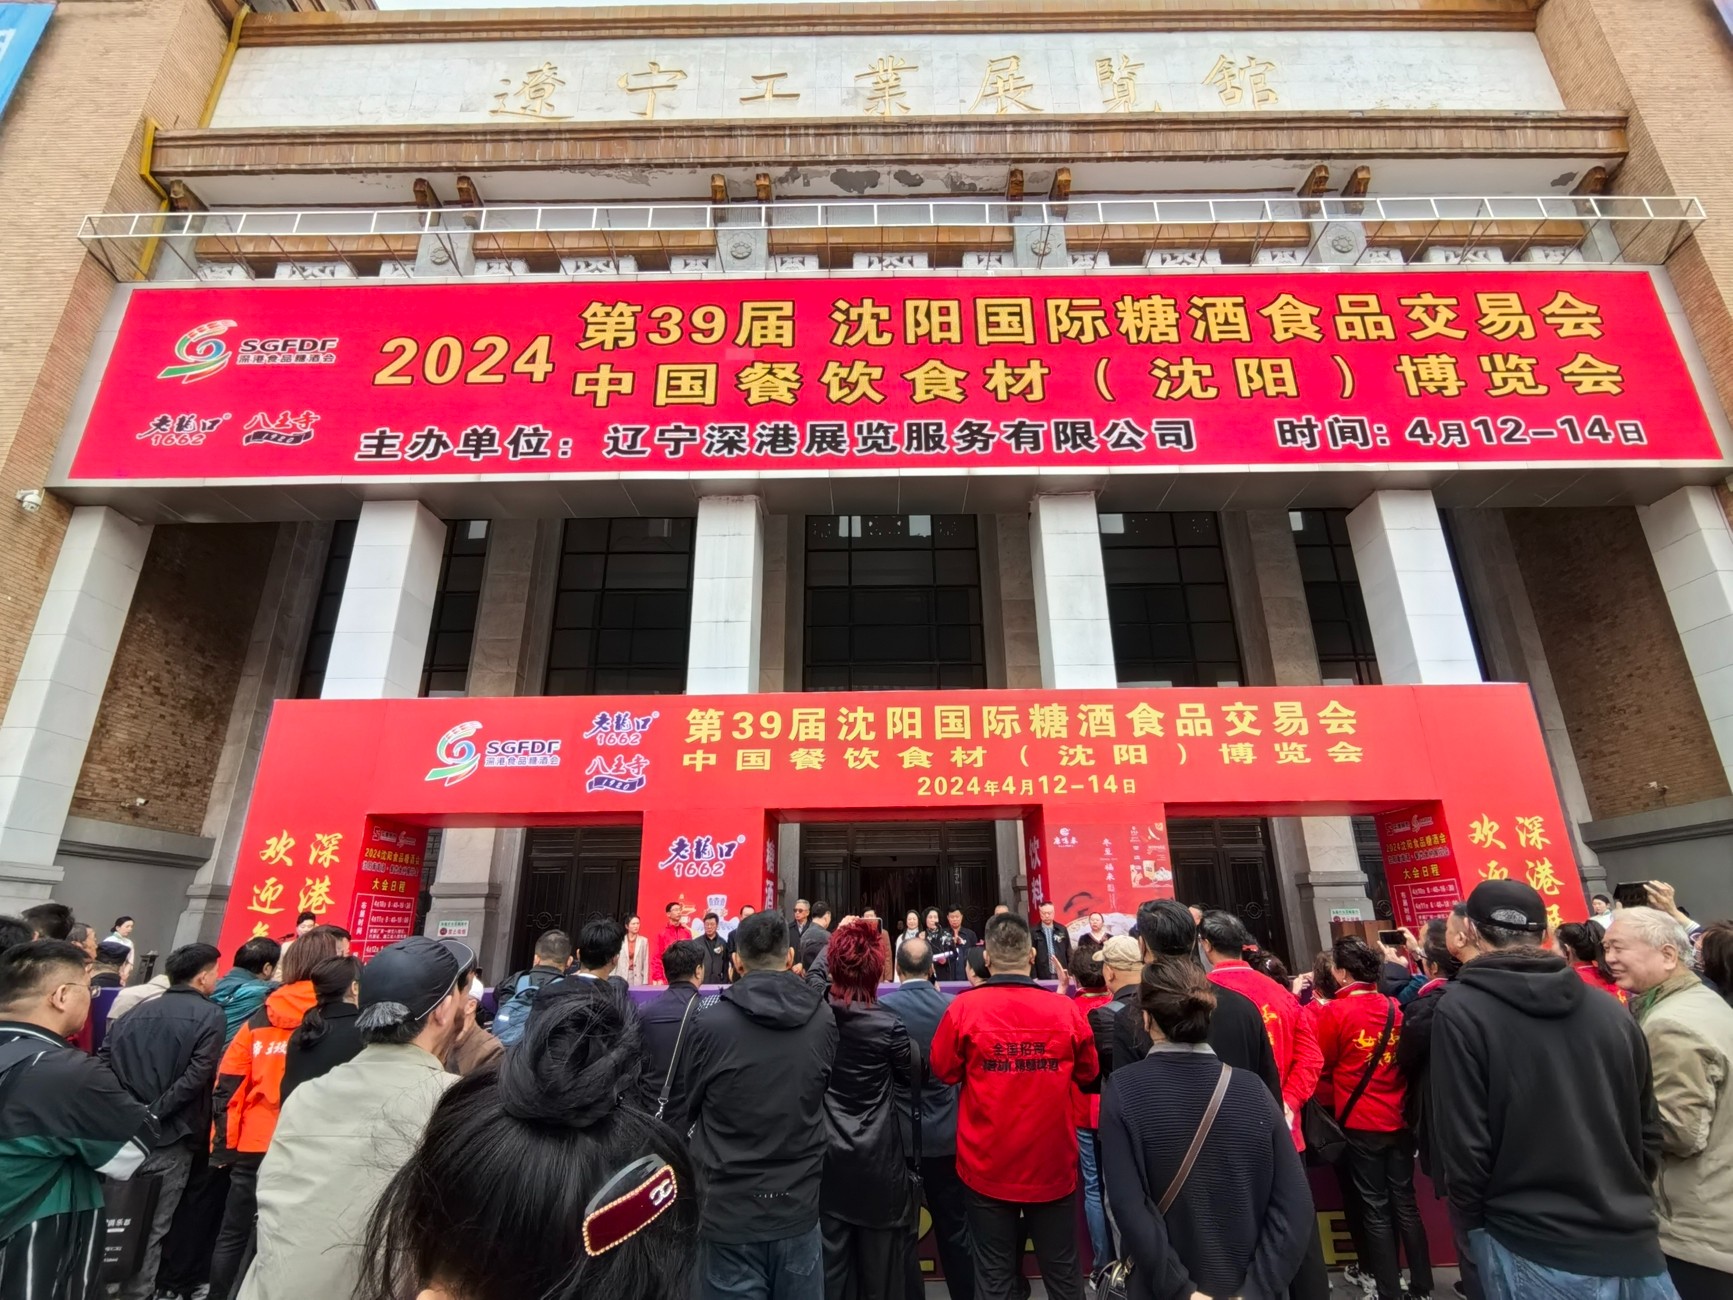 The 39th Shenyang Food, Sugar and Wine Fair in 2024- Opening Ceremony